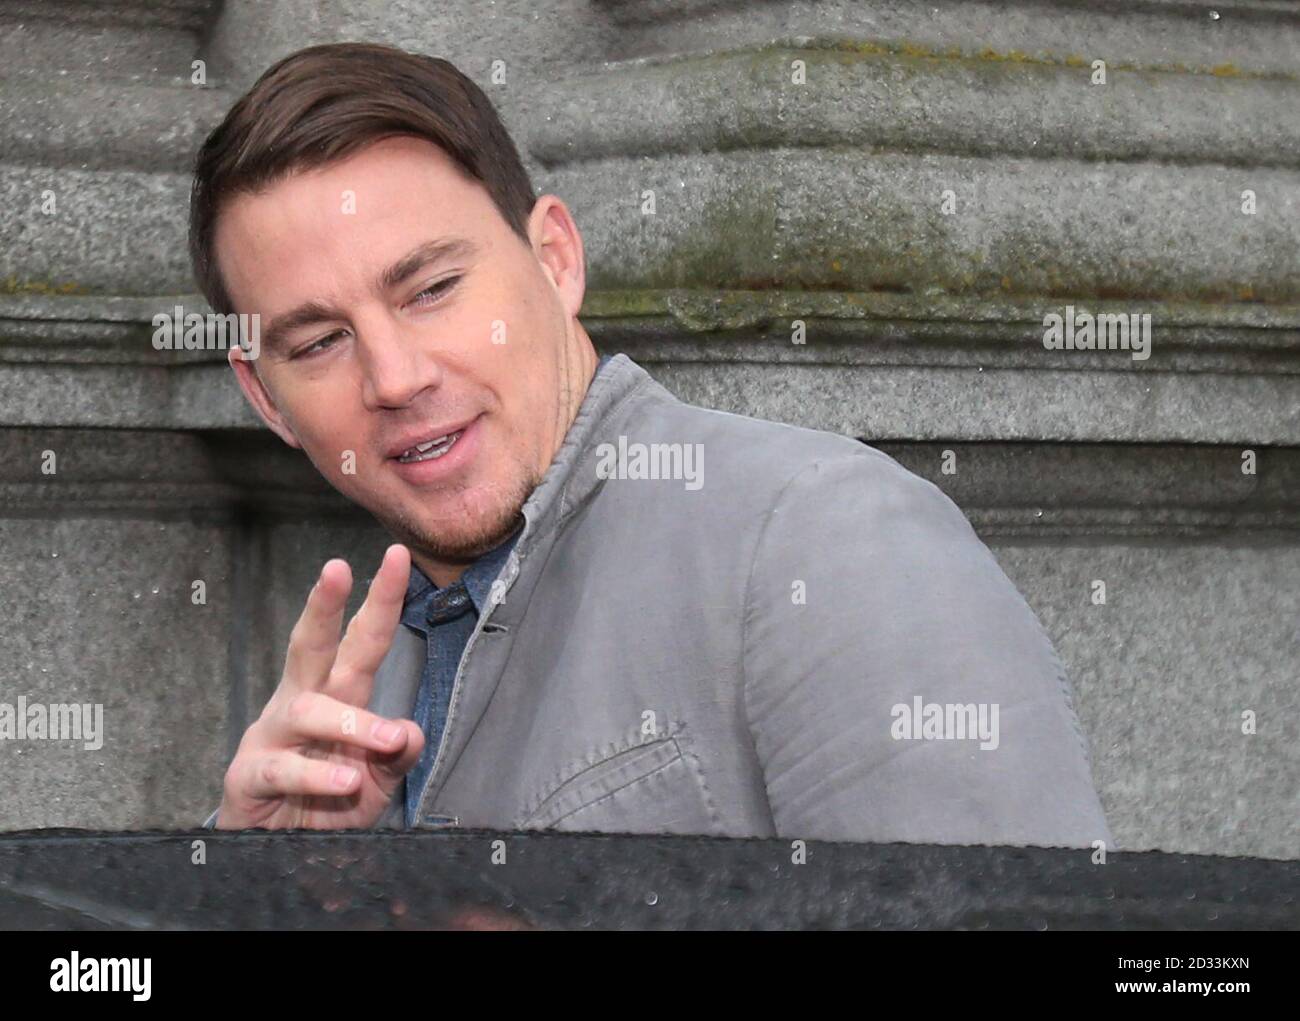 Hollywood Star Channing Tatum leaving a function at Trinity College while in Ireland promoting his new movie 22 Jump Street in Dublin. Stock Photo